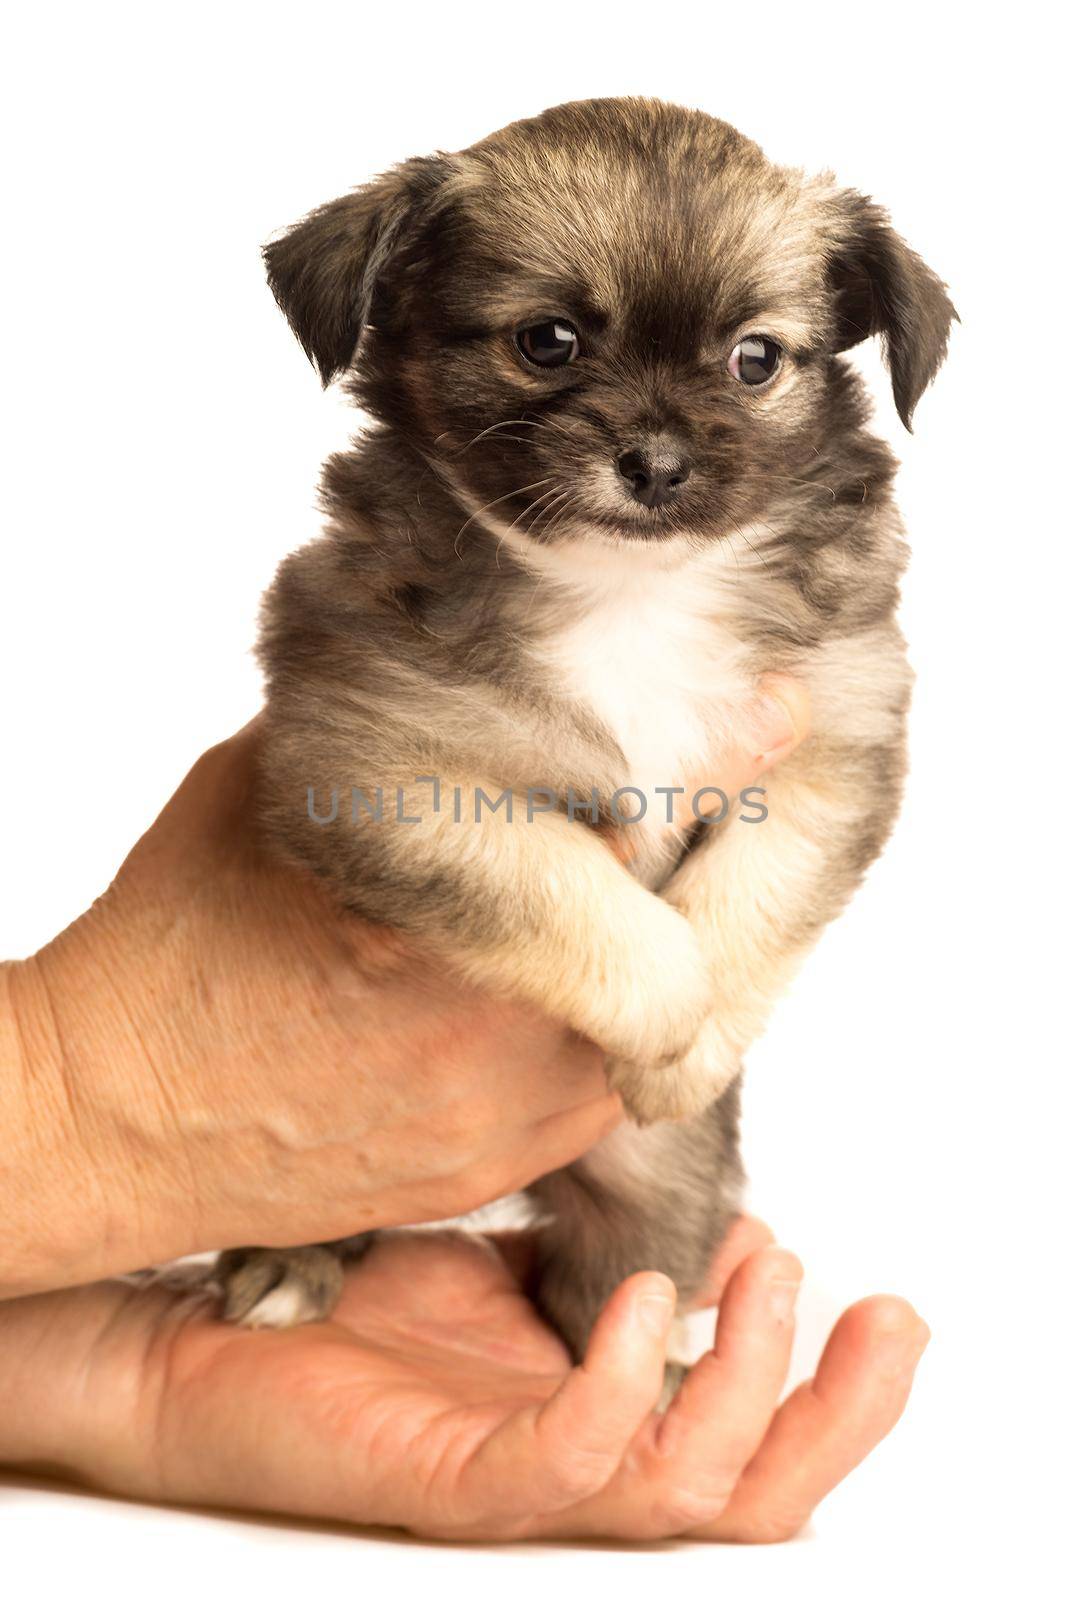 Cute little chihuahua puppy isolated in white background held in human hands by LeoniekvanderVliet